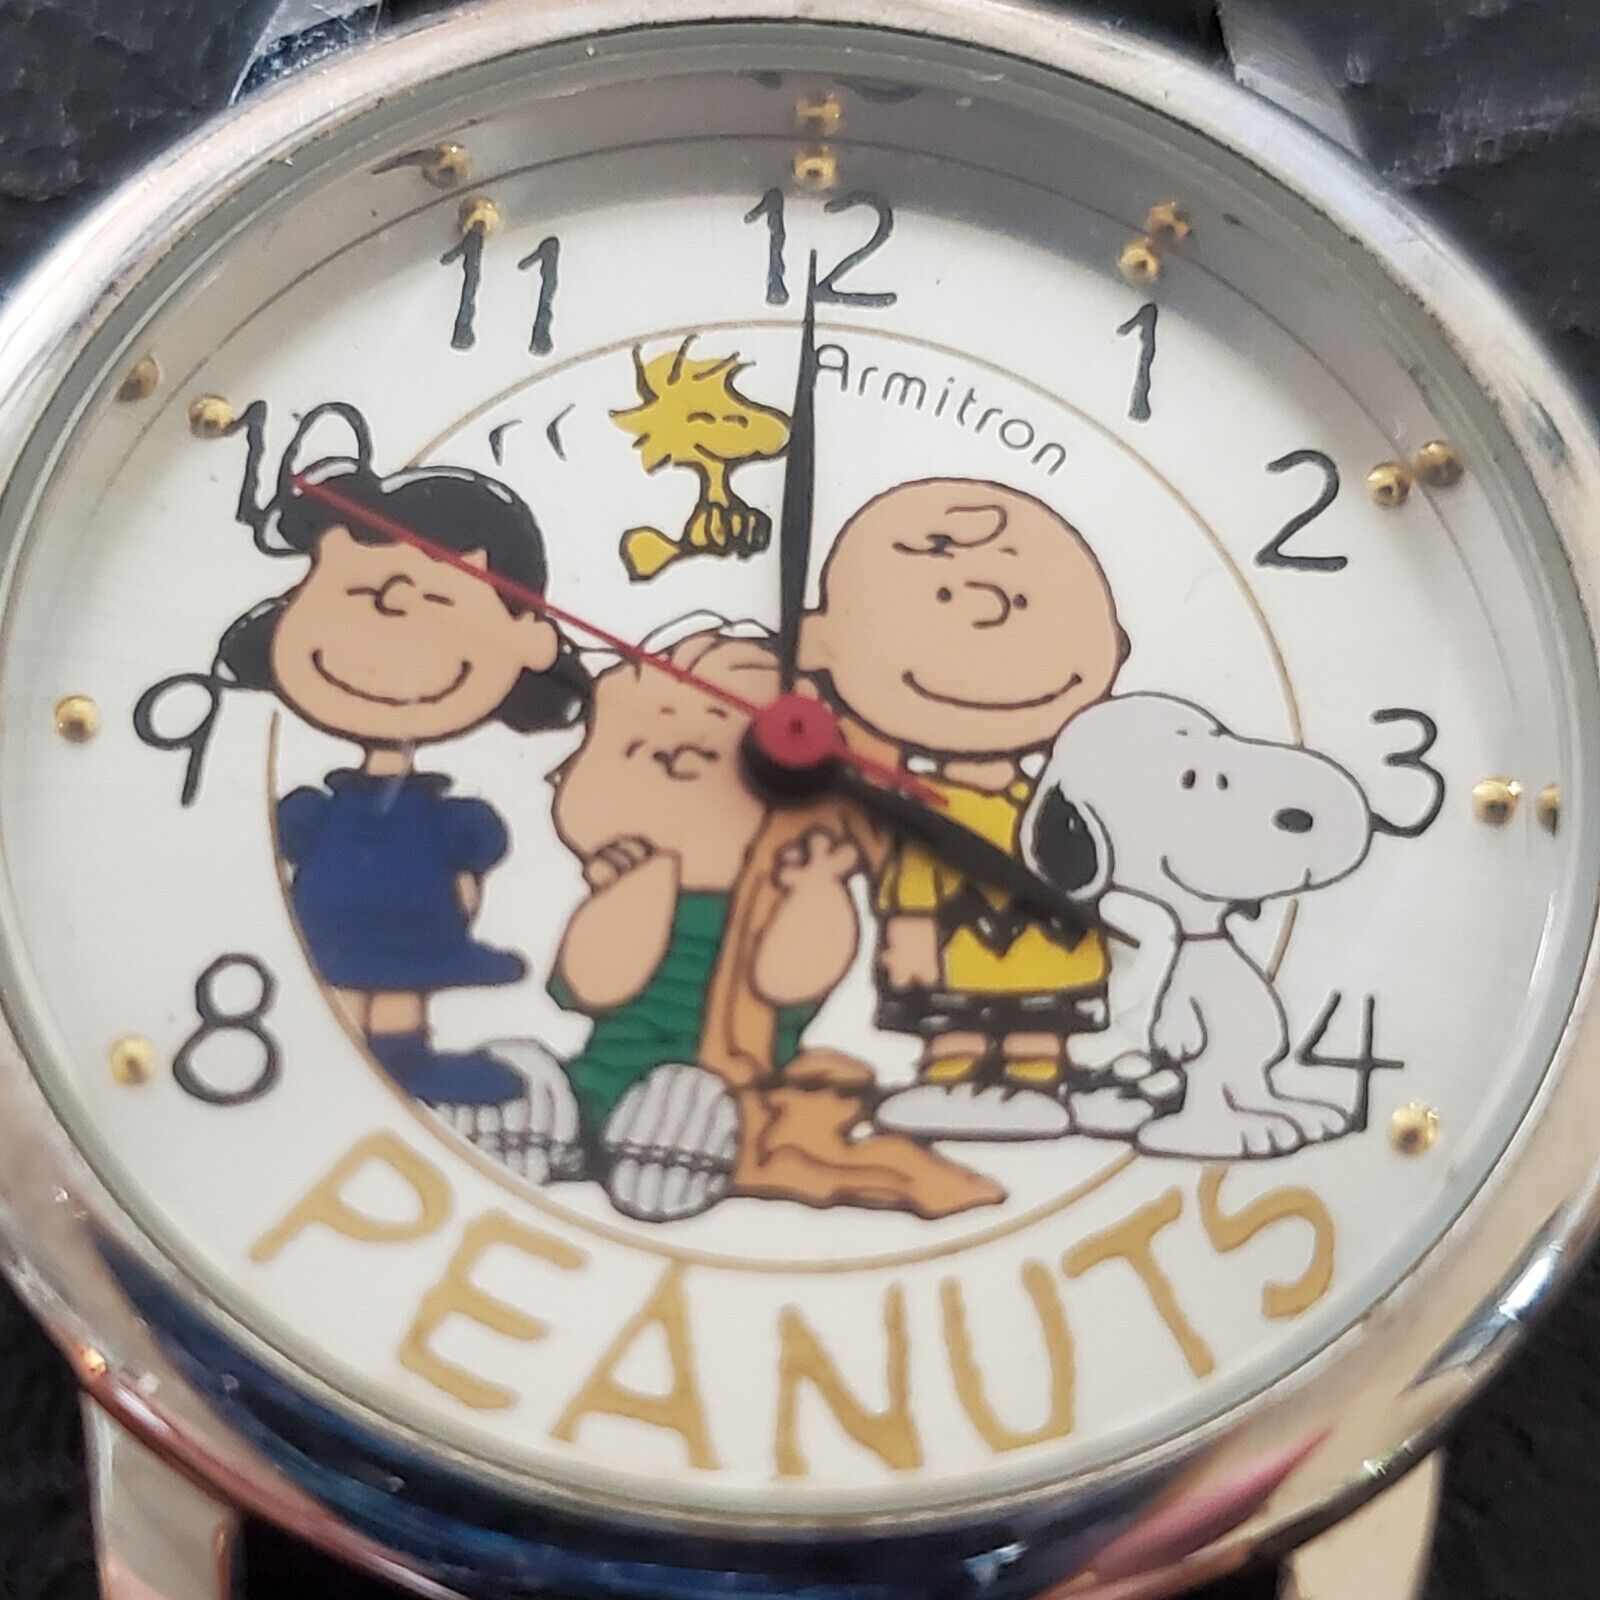 Vintage Peanuts Snoopy Collectable Watch Armitron  Untested Rare Retired